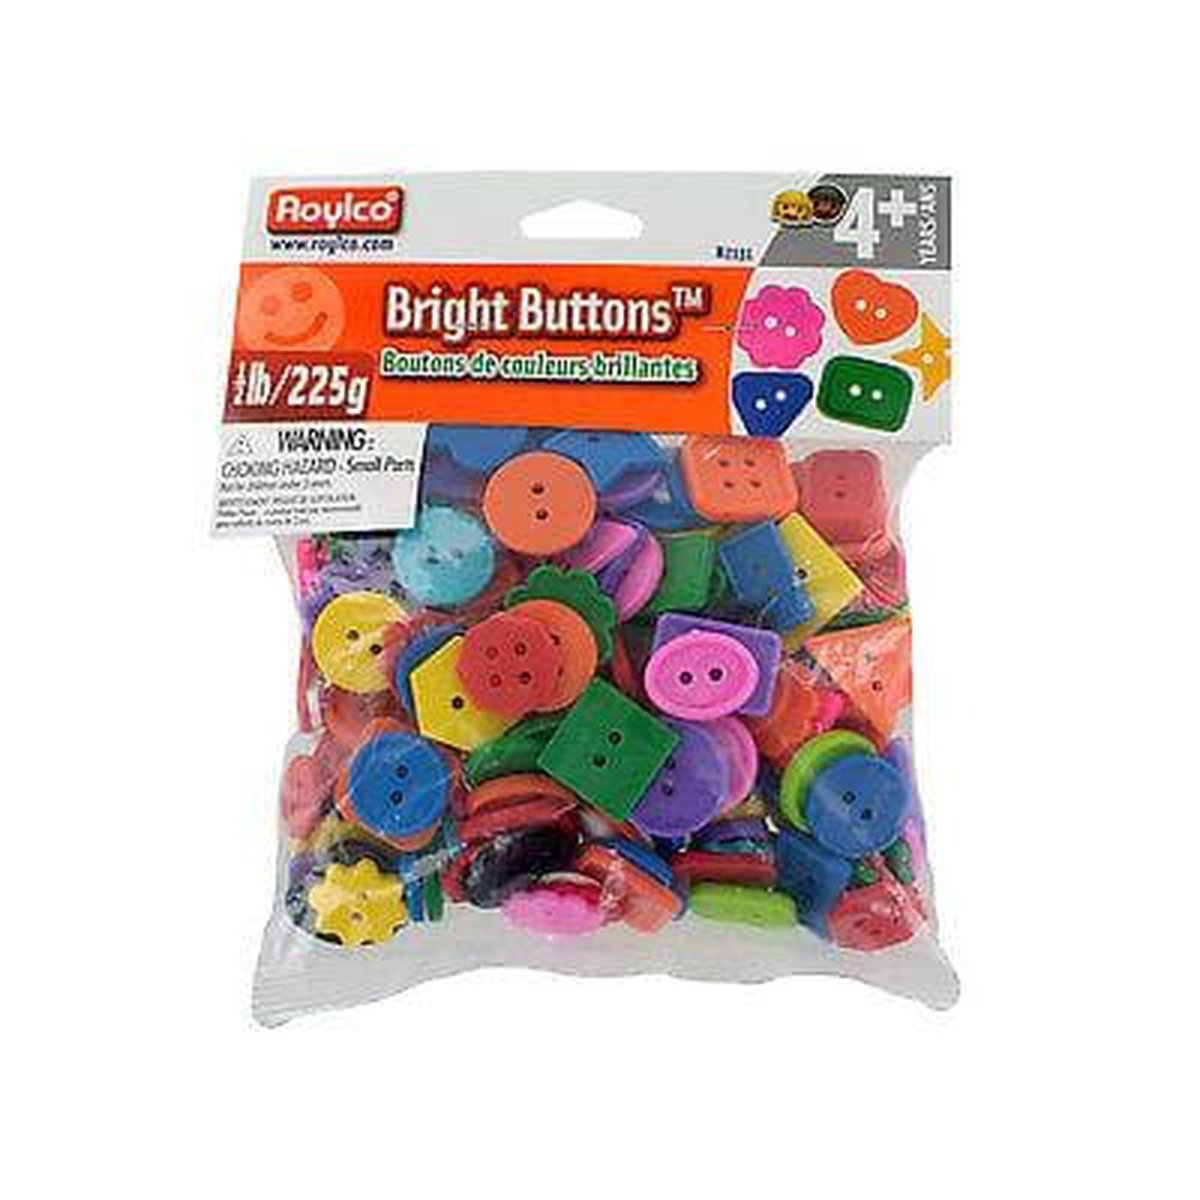 Bright Buttons, Assorted Sizes, Shapes and Colours - Kids Party Craft